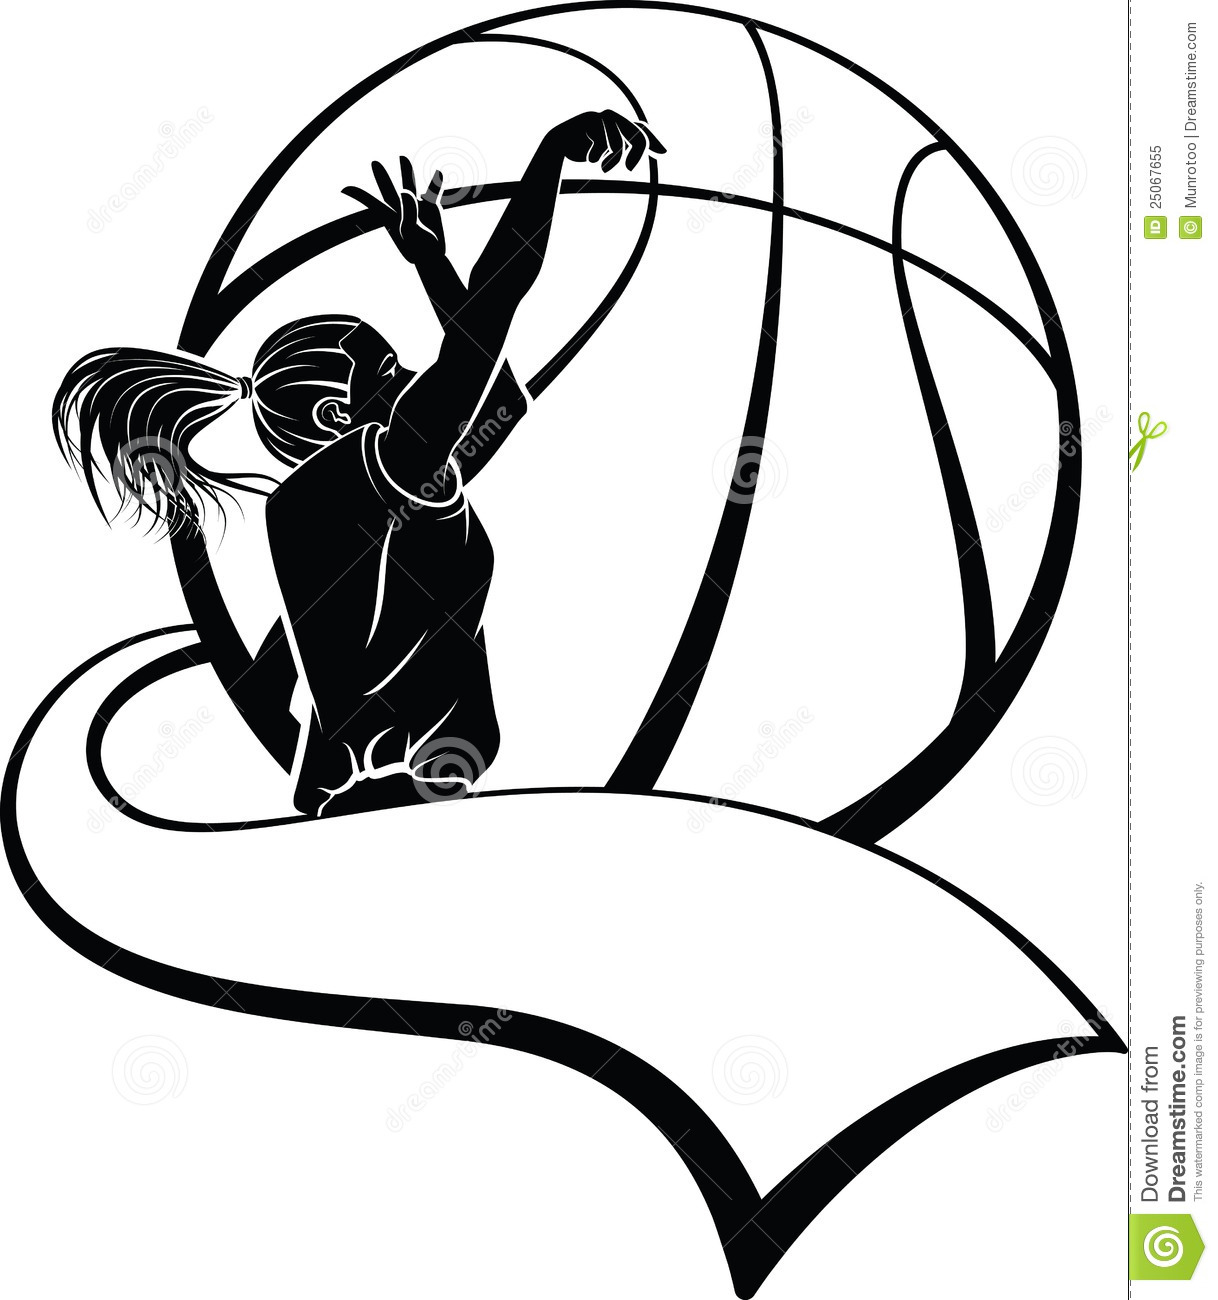 Girl Basketball Shooter With Pennant Royalty Free Stock Photo   Image